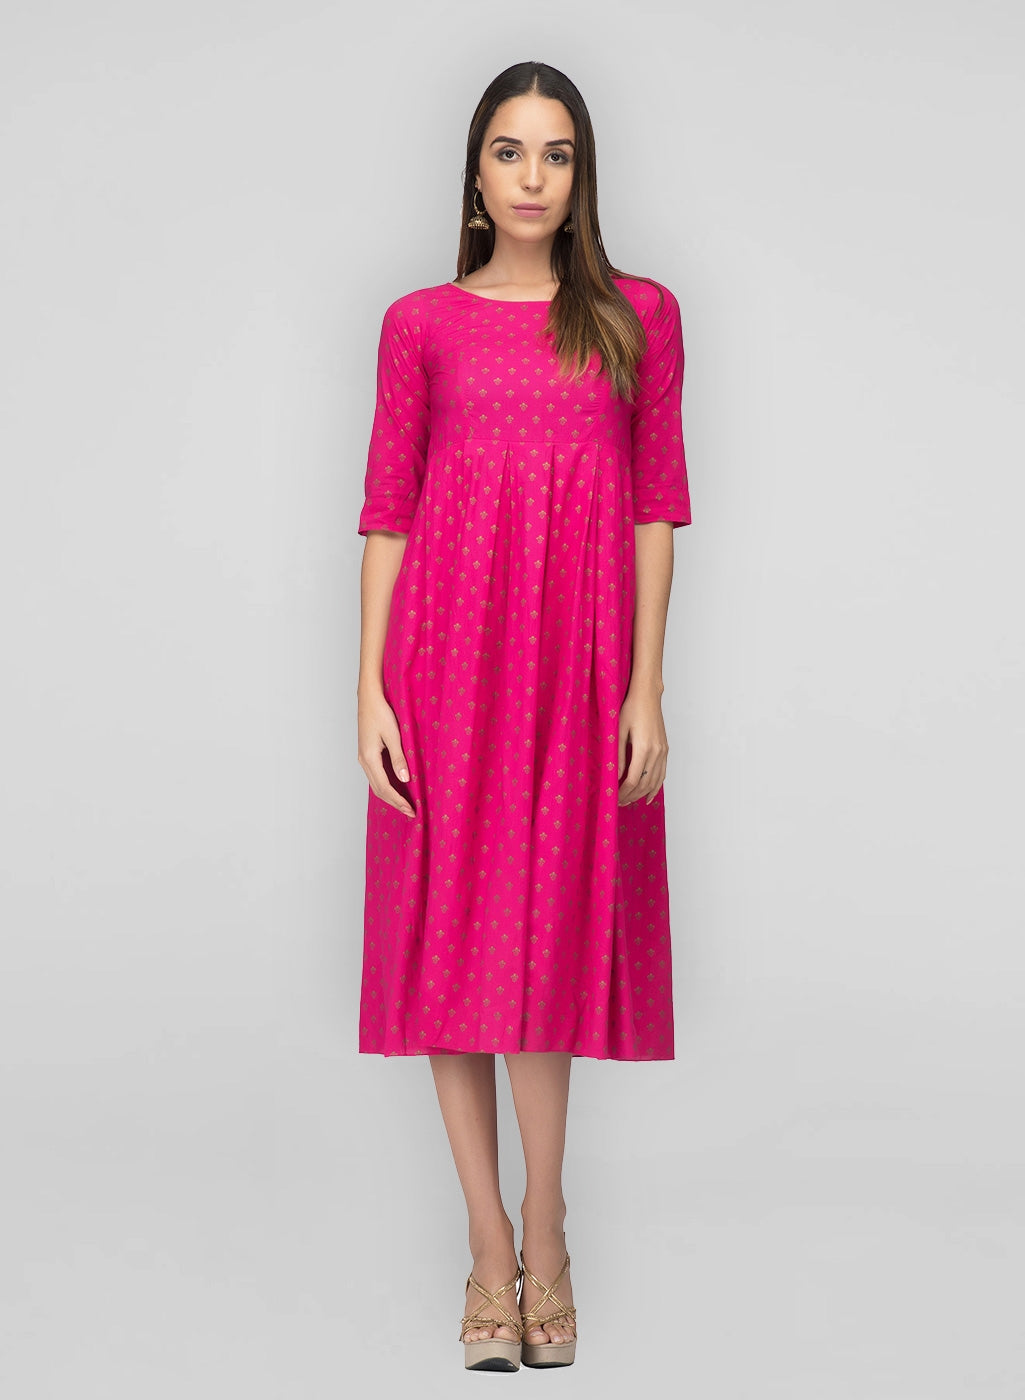 Shop this pink dress from thesvaya